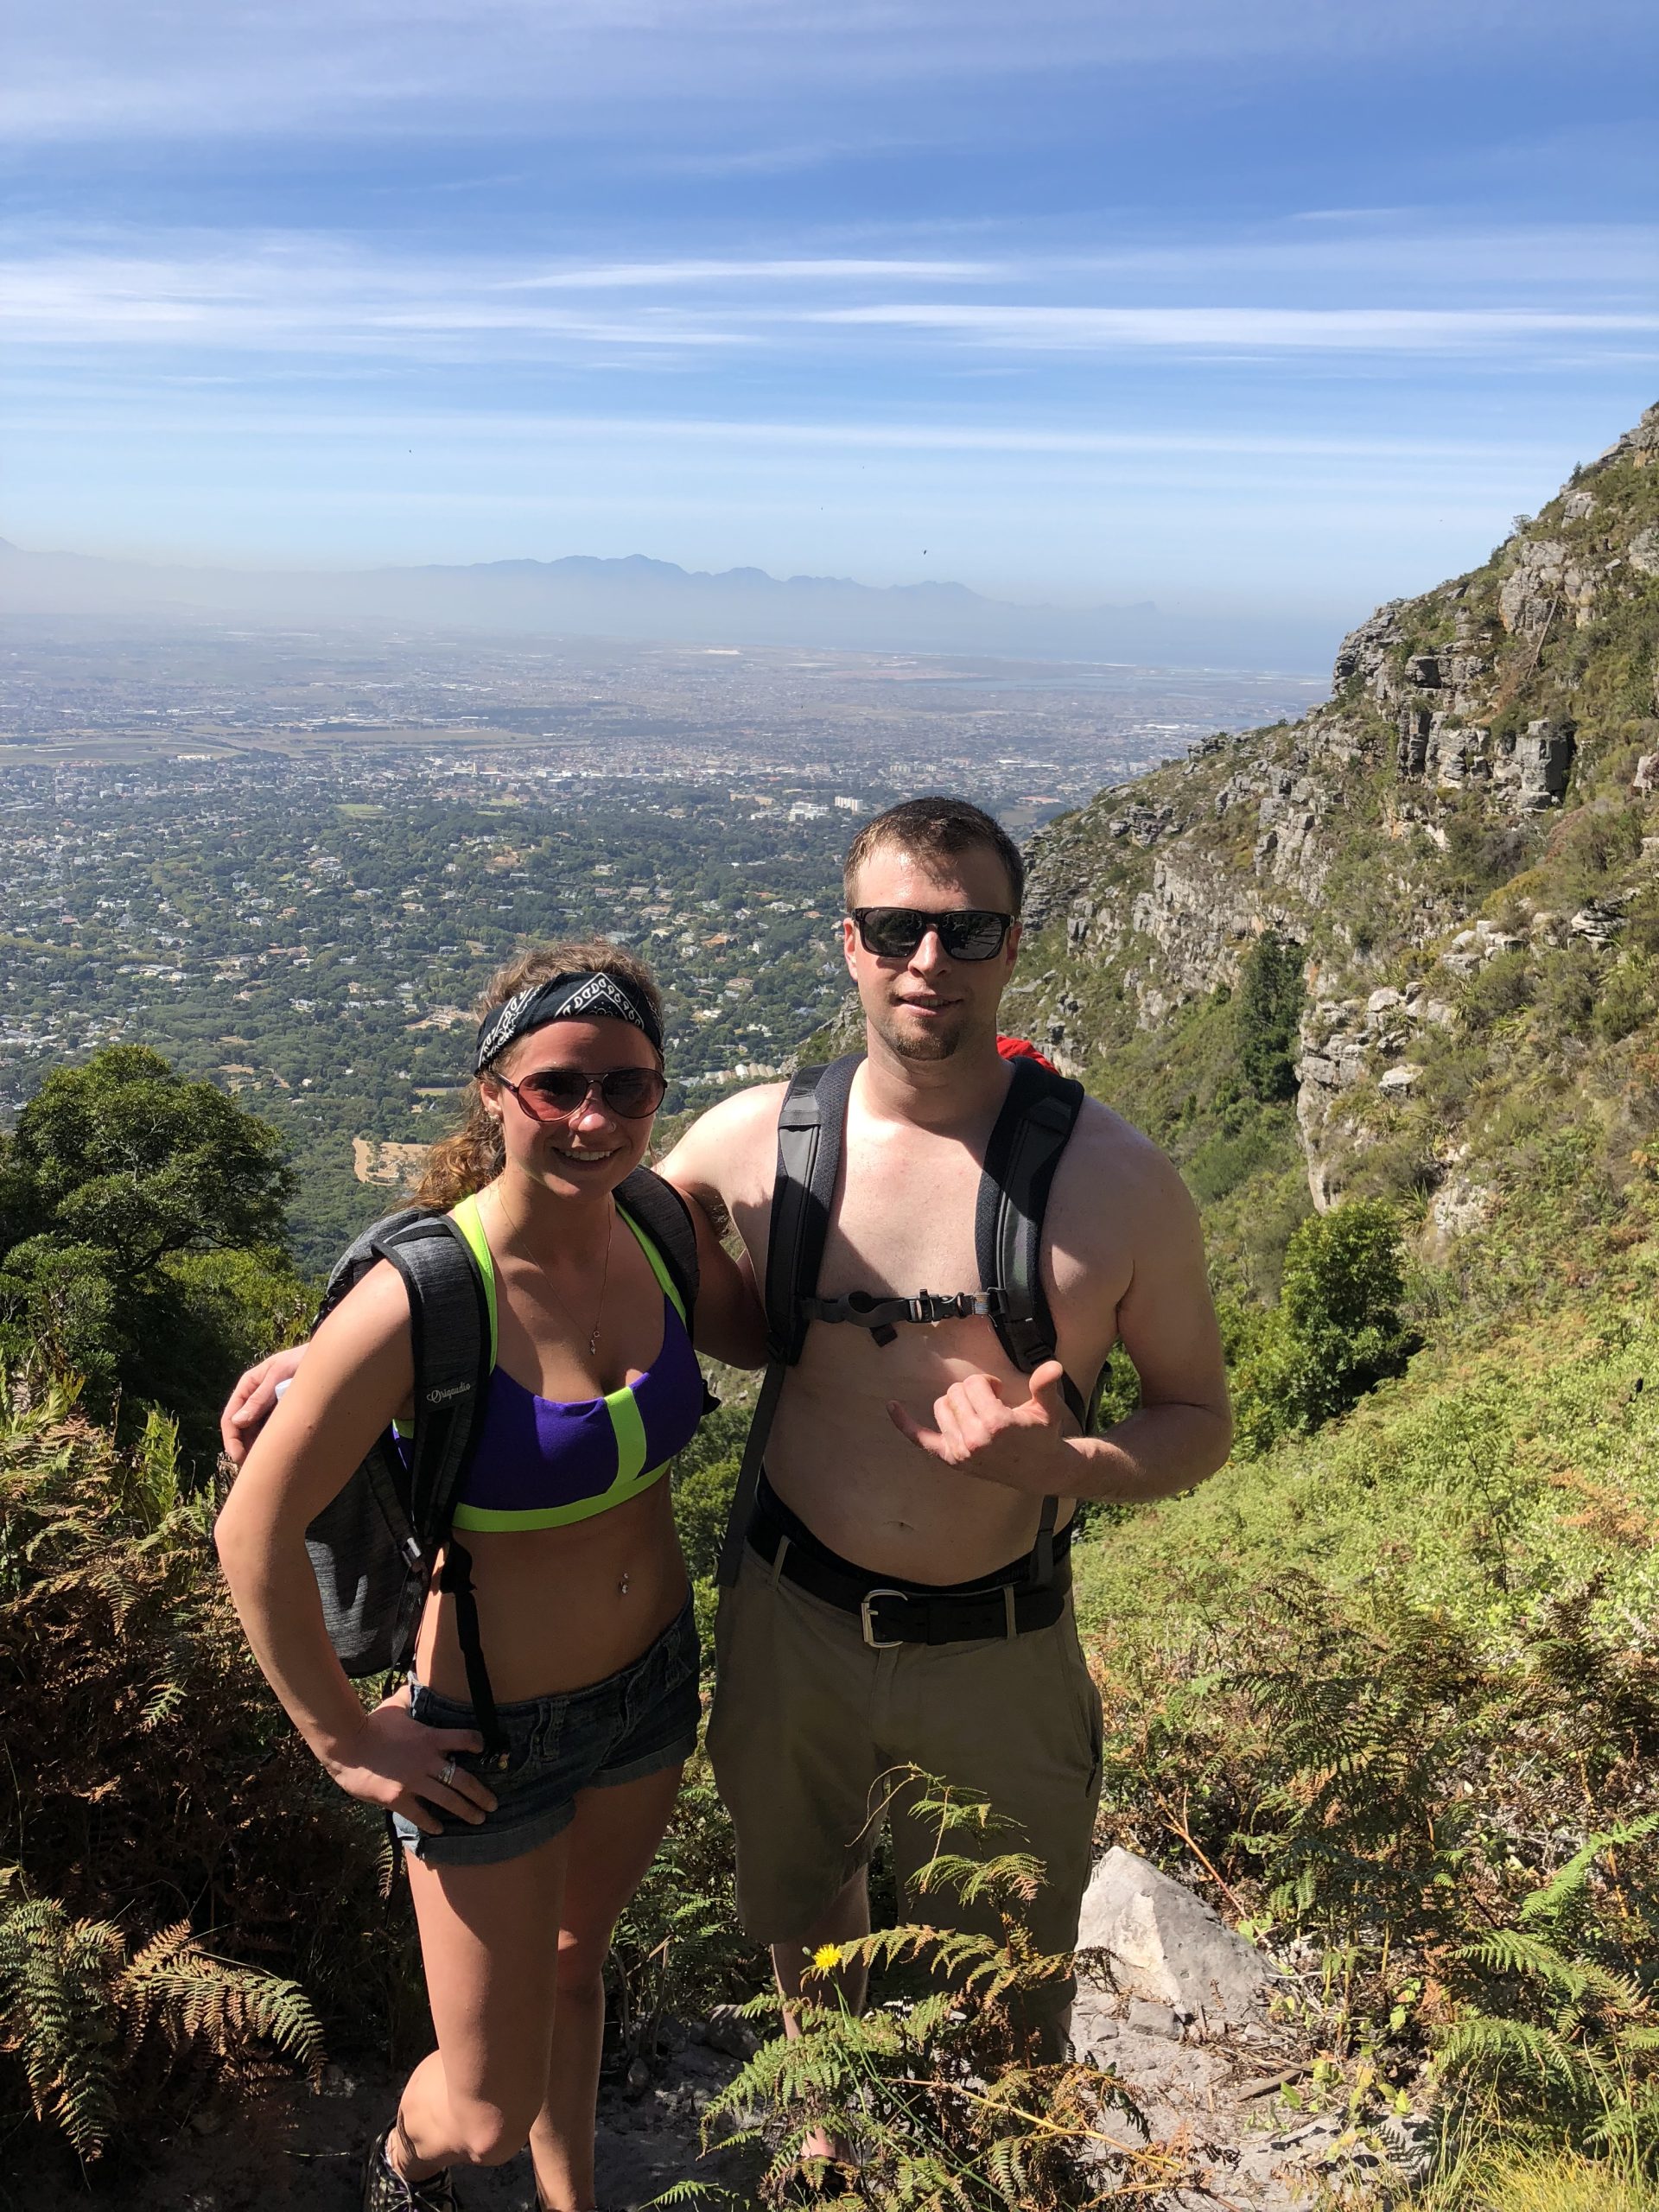 Shirtless couple hiking in South Africa